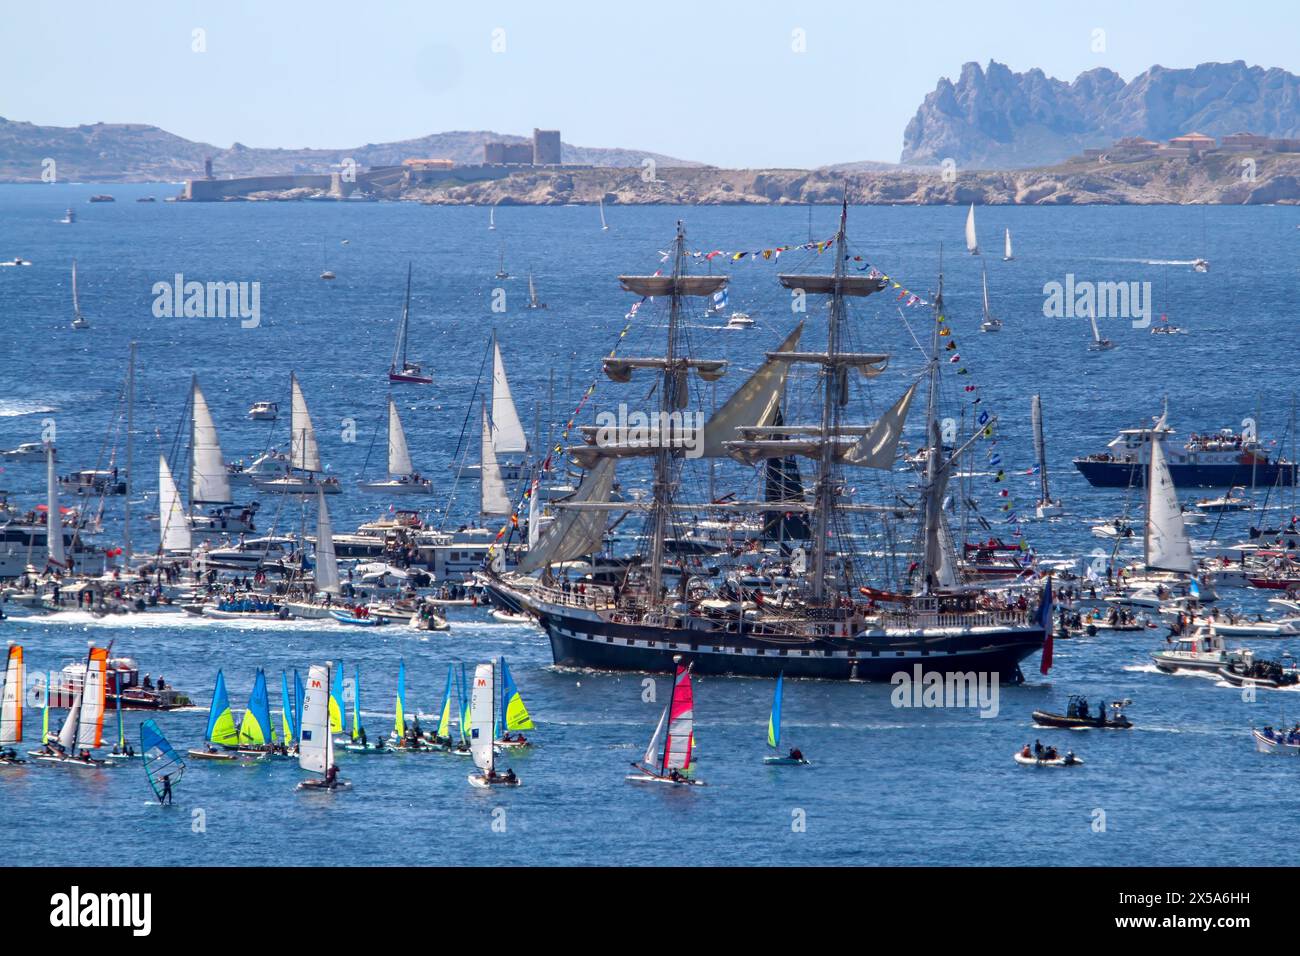 The French three-masted ship “Belem” arrives in Marseille. Coming from Athens with the Olympic flame on board, the Belem arrives in the harbor of Marseille and parades along the coast of the city of Marseille surrounded by thousand of boats. Stock Photo